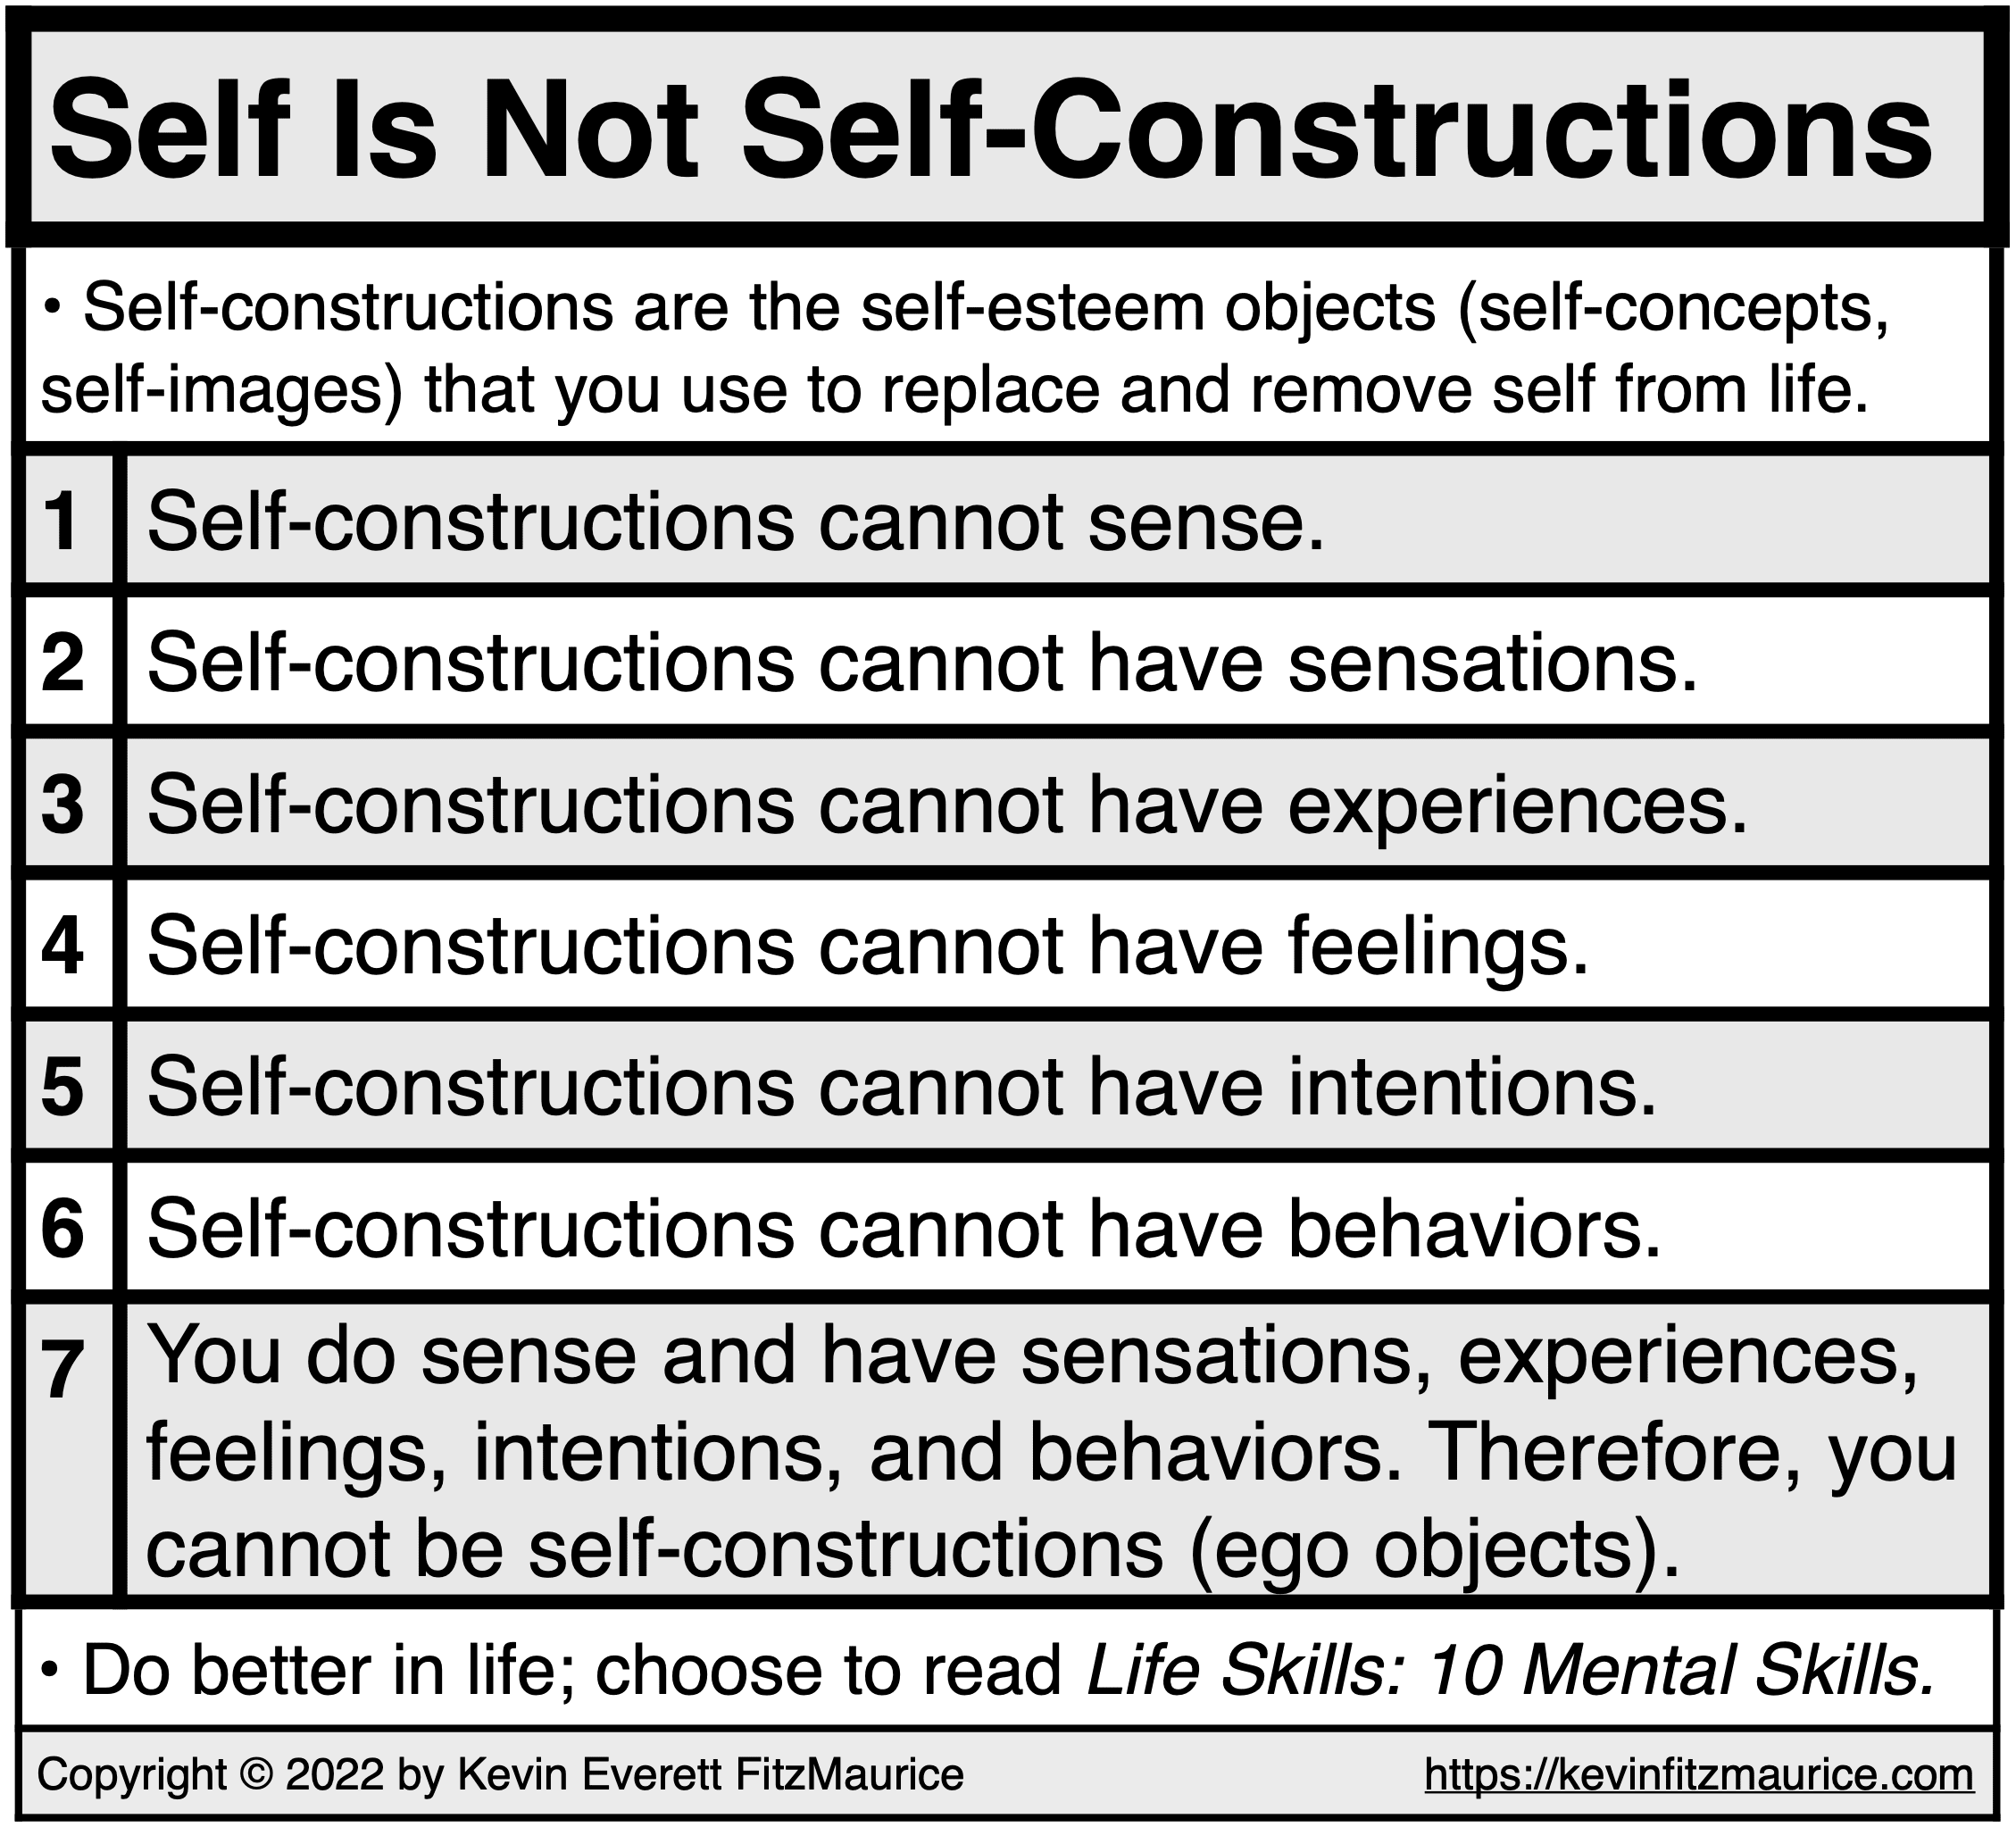 Self Is Not Self-Constructions